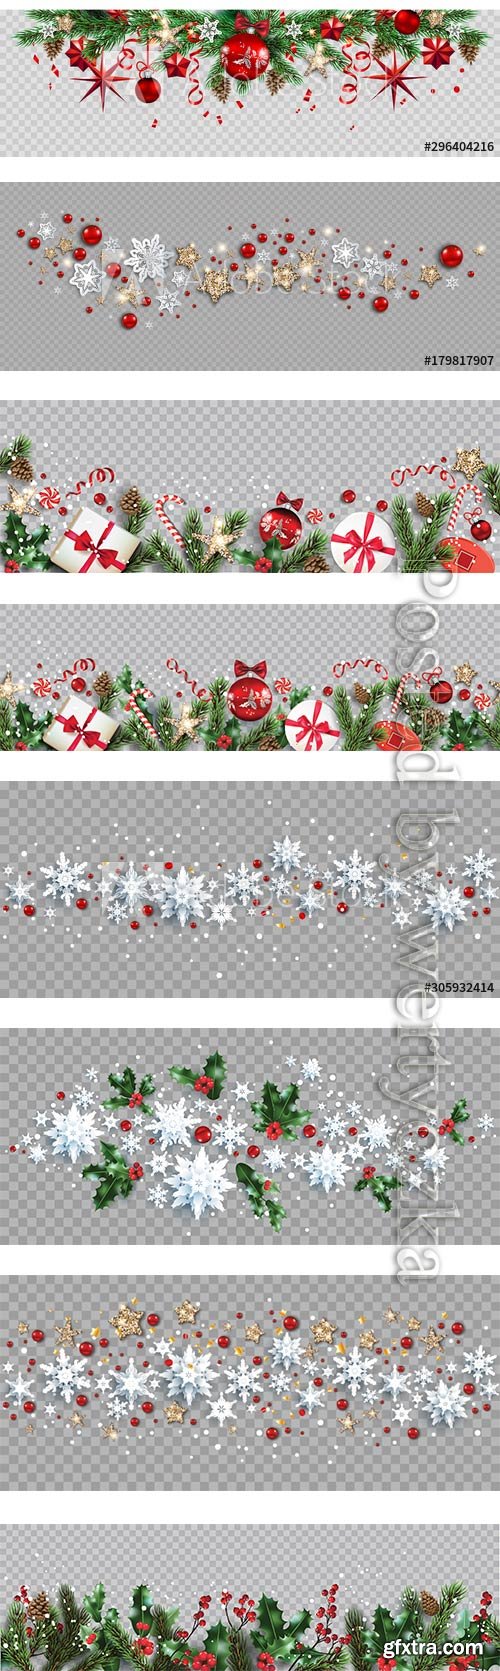 Isolated winter Christmas holiday banner